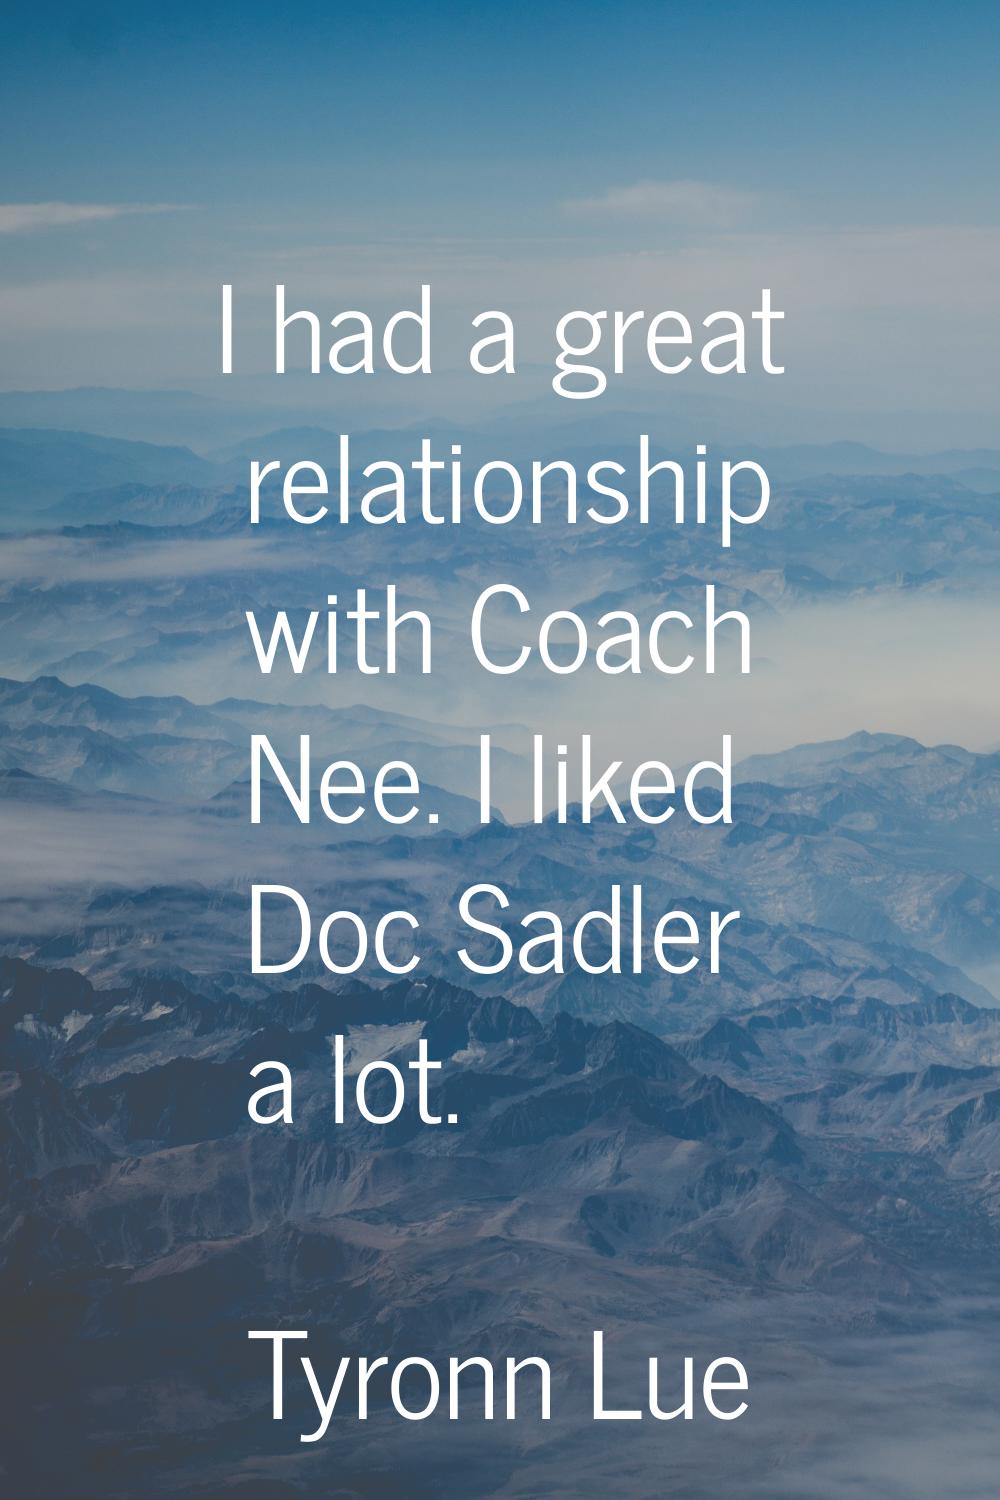 I had a great relationship with Coach Nee. I liked Doc Sadler a lot.